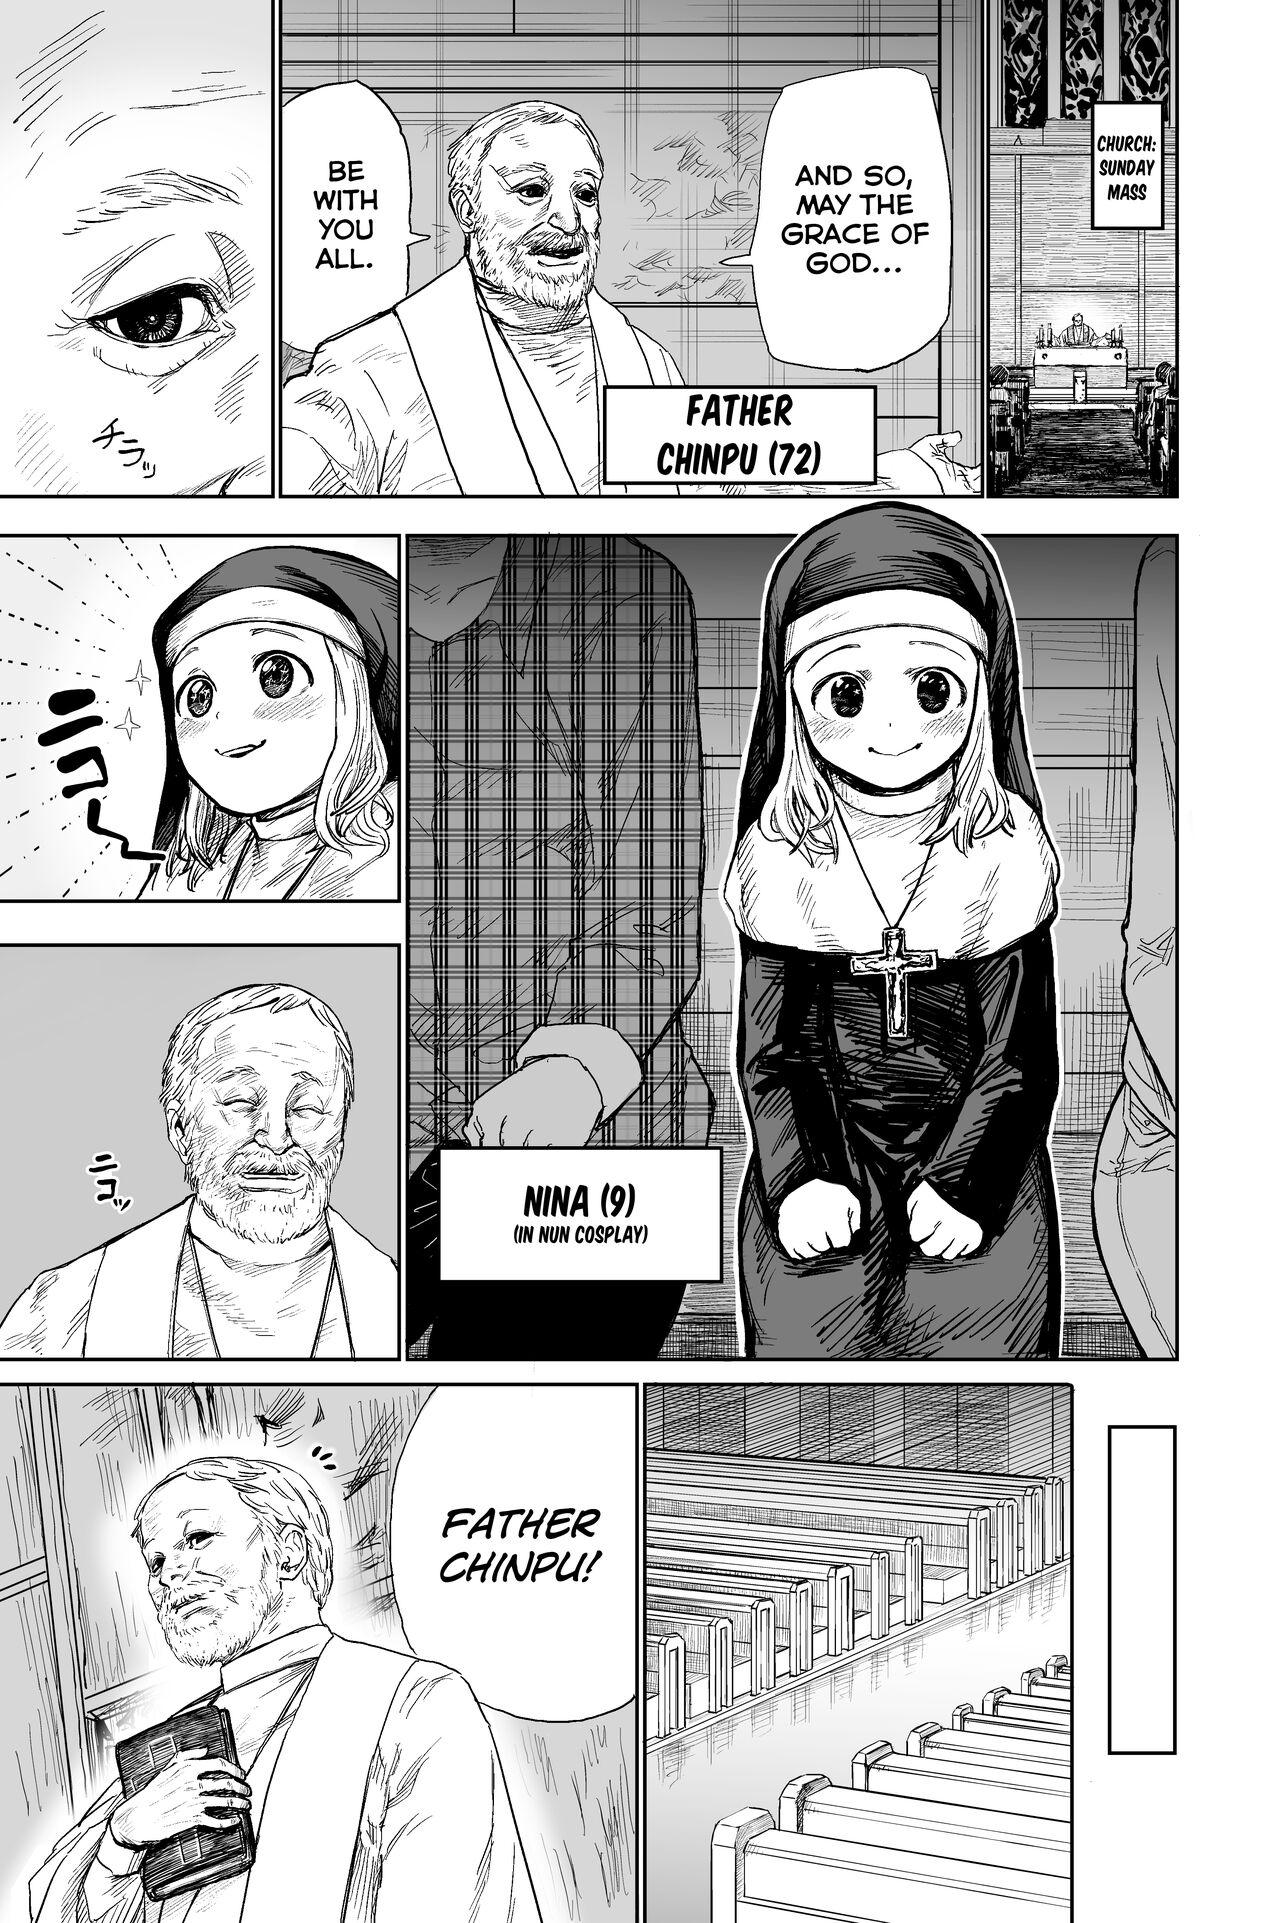 Periscope Loli Sister to Sex suru Isshuukan | A Week of Sex With a Loli Nun Titty Fuck - Page 2